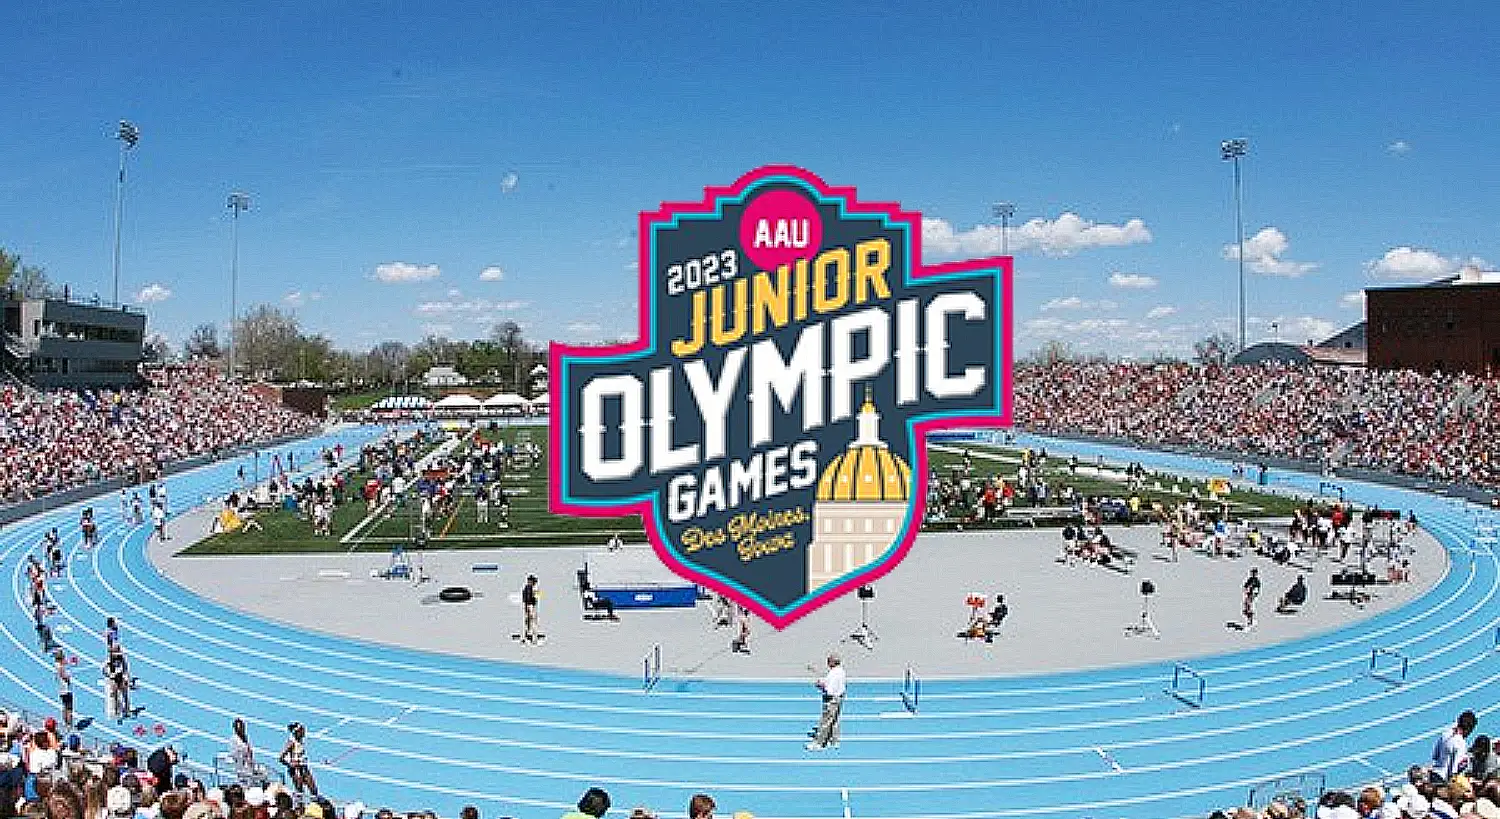 Day 2: AAU Junior Olympic Games 2023, live results, schedule, stream